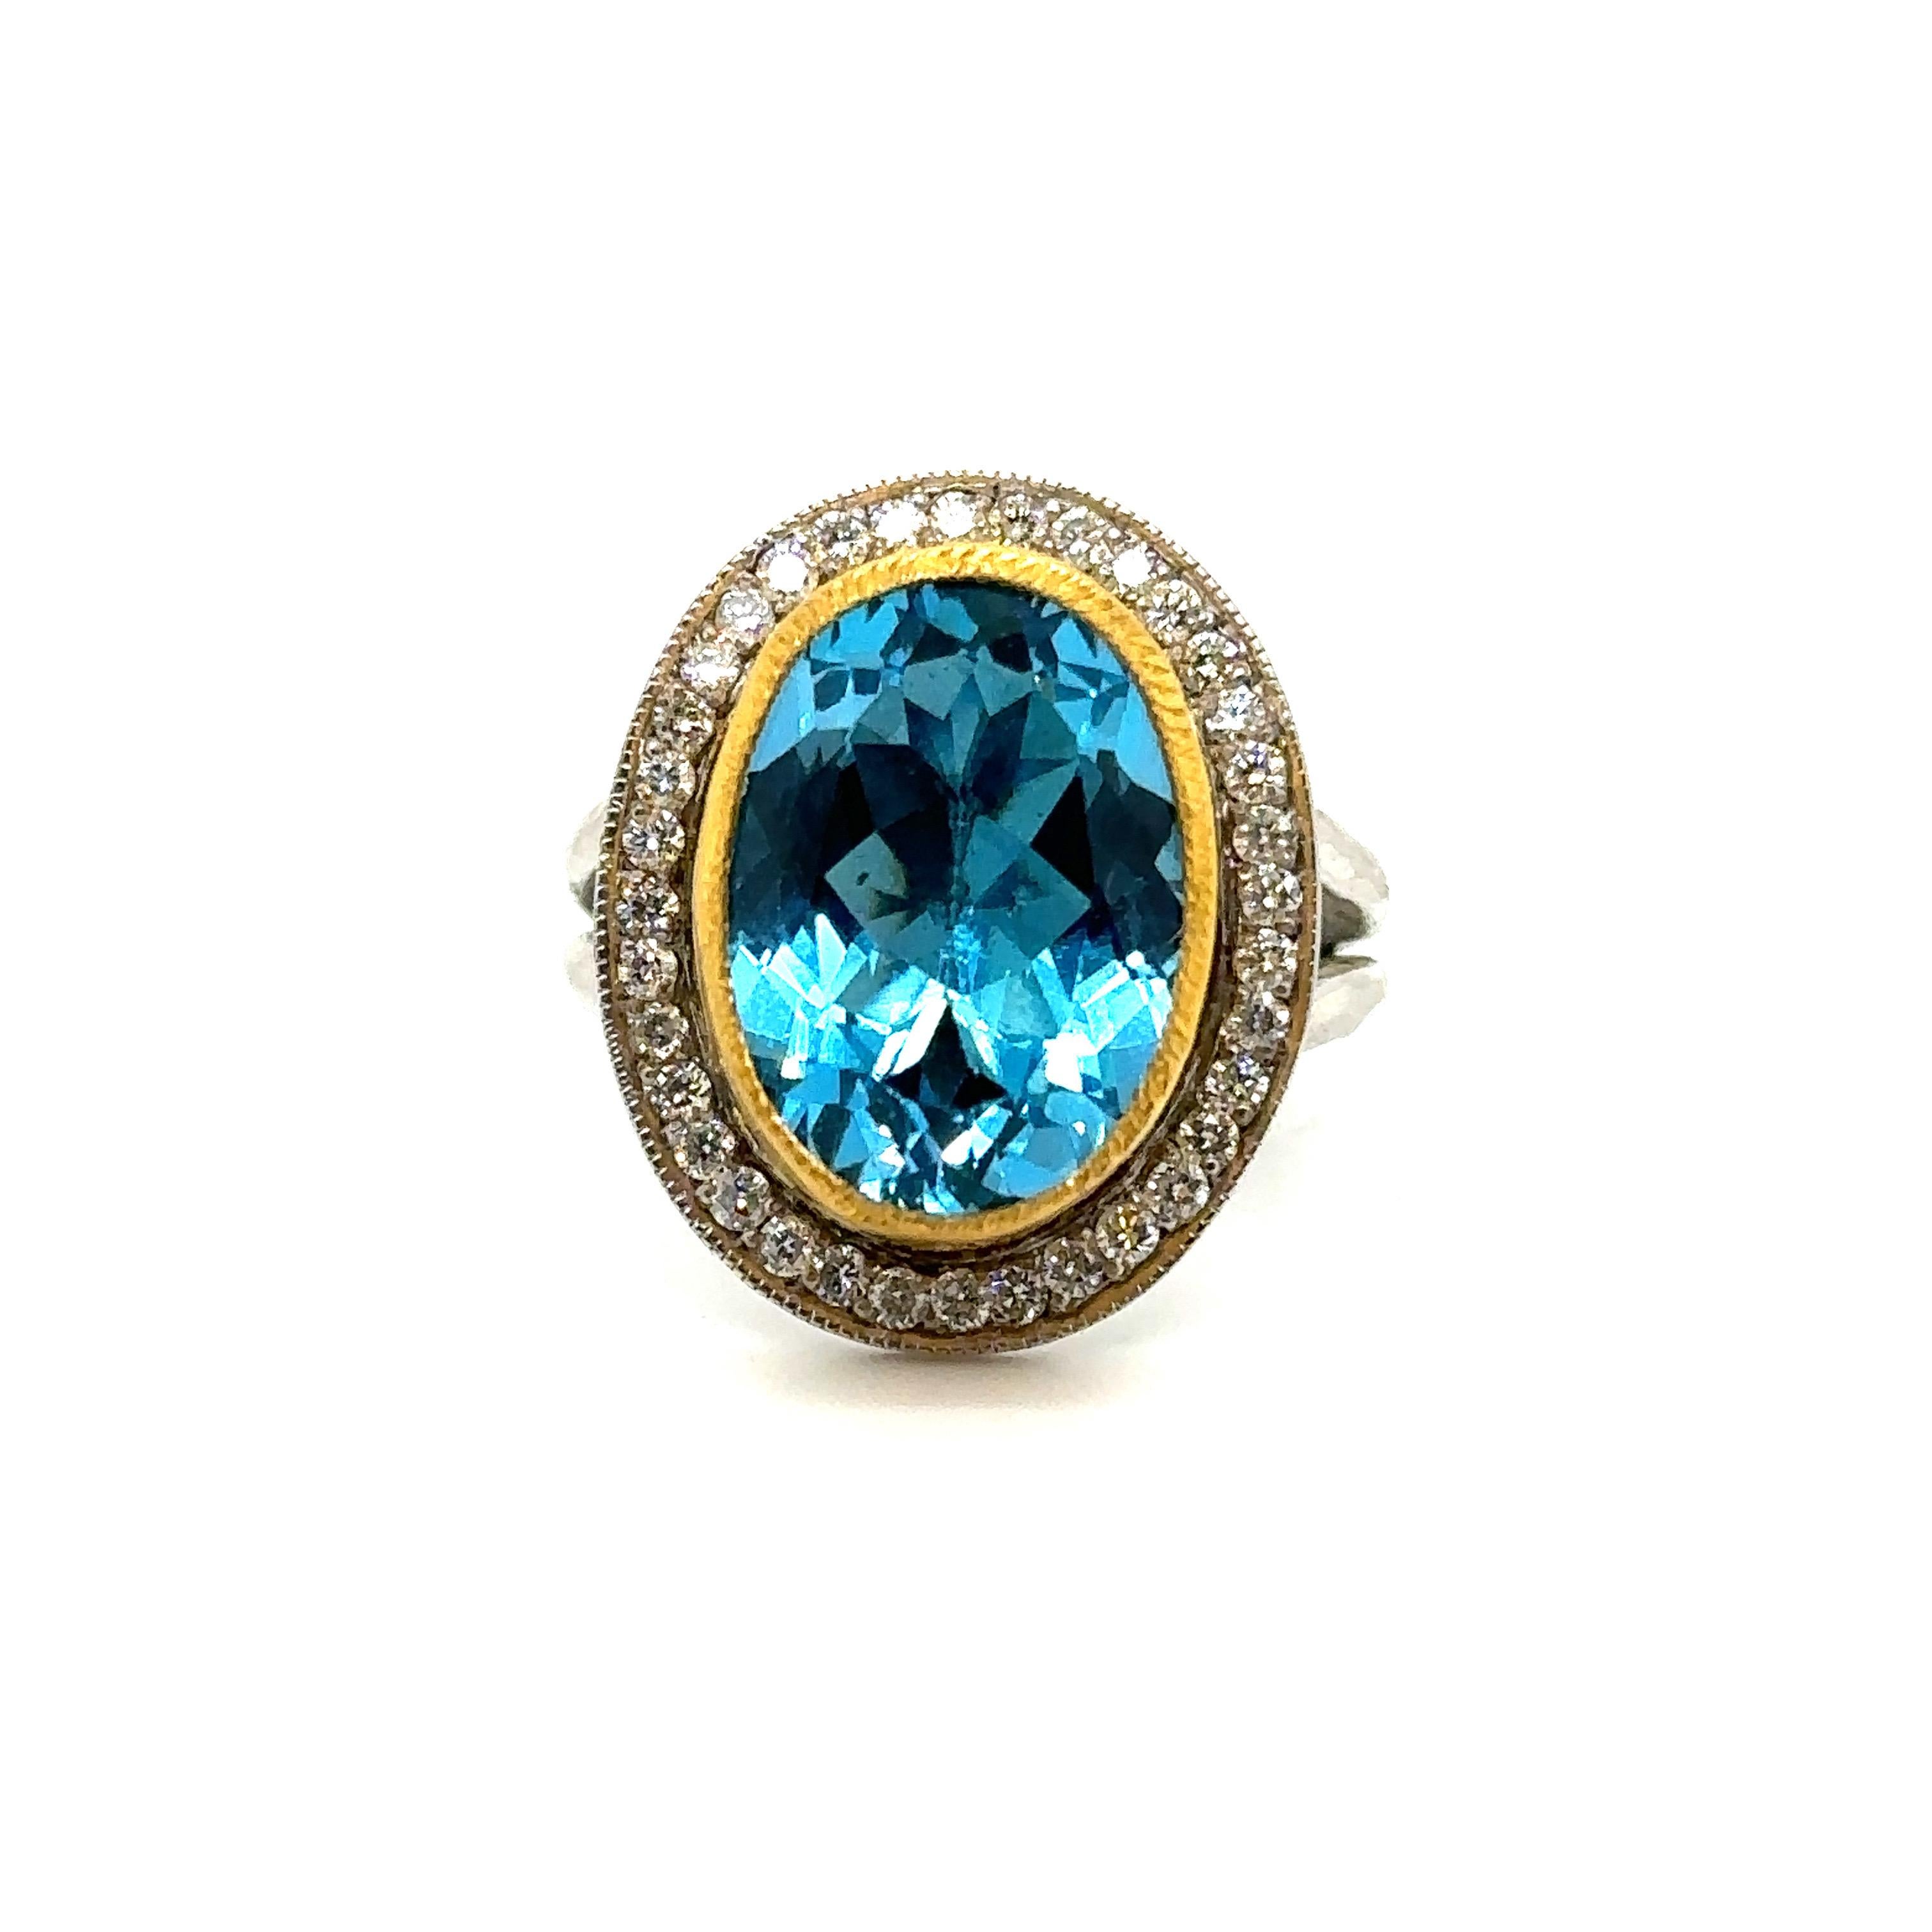 JAS-22-305 - 24K GOLD/STERLING SILVER RING with DIAMONDS AND SWISS BLUE TOPAZ For Sale 1